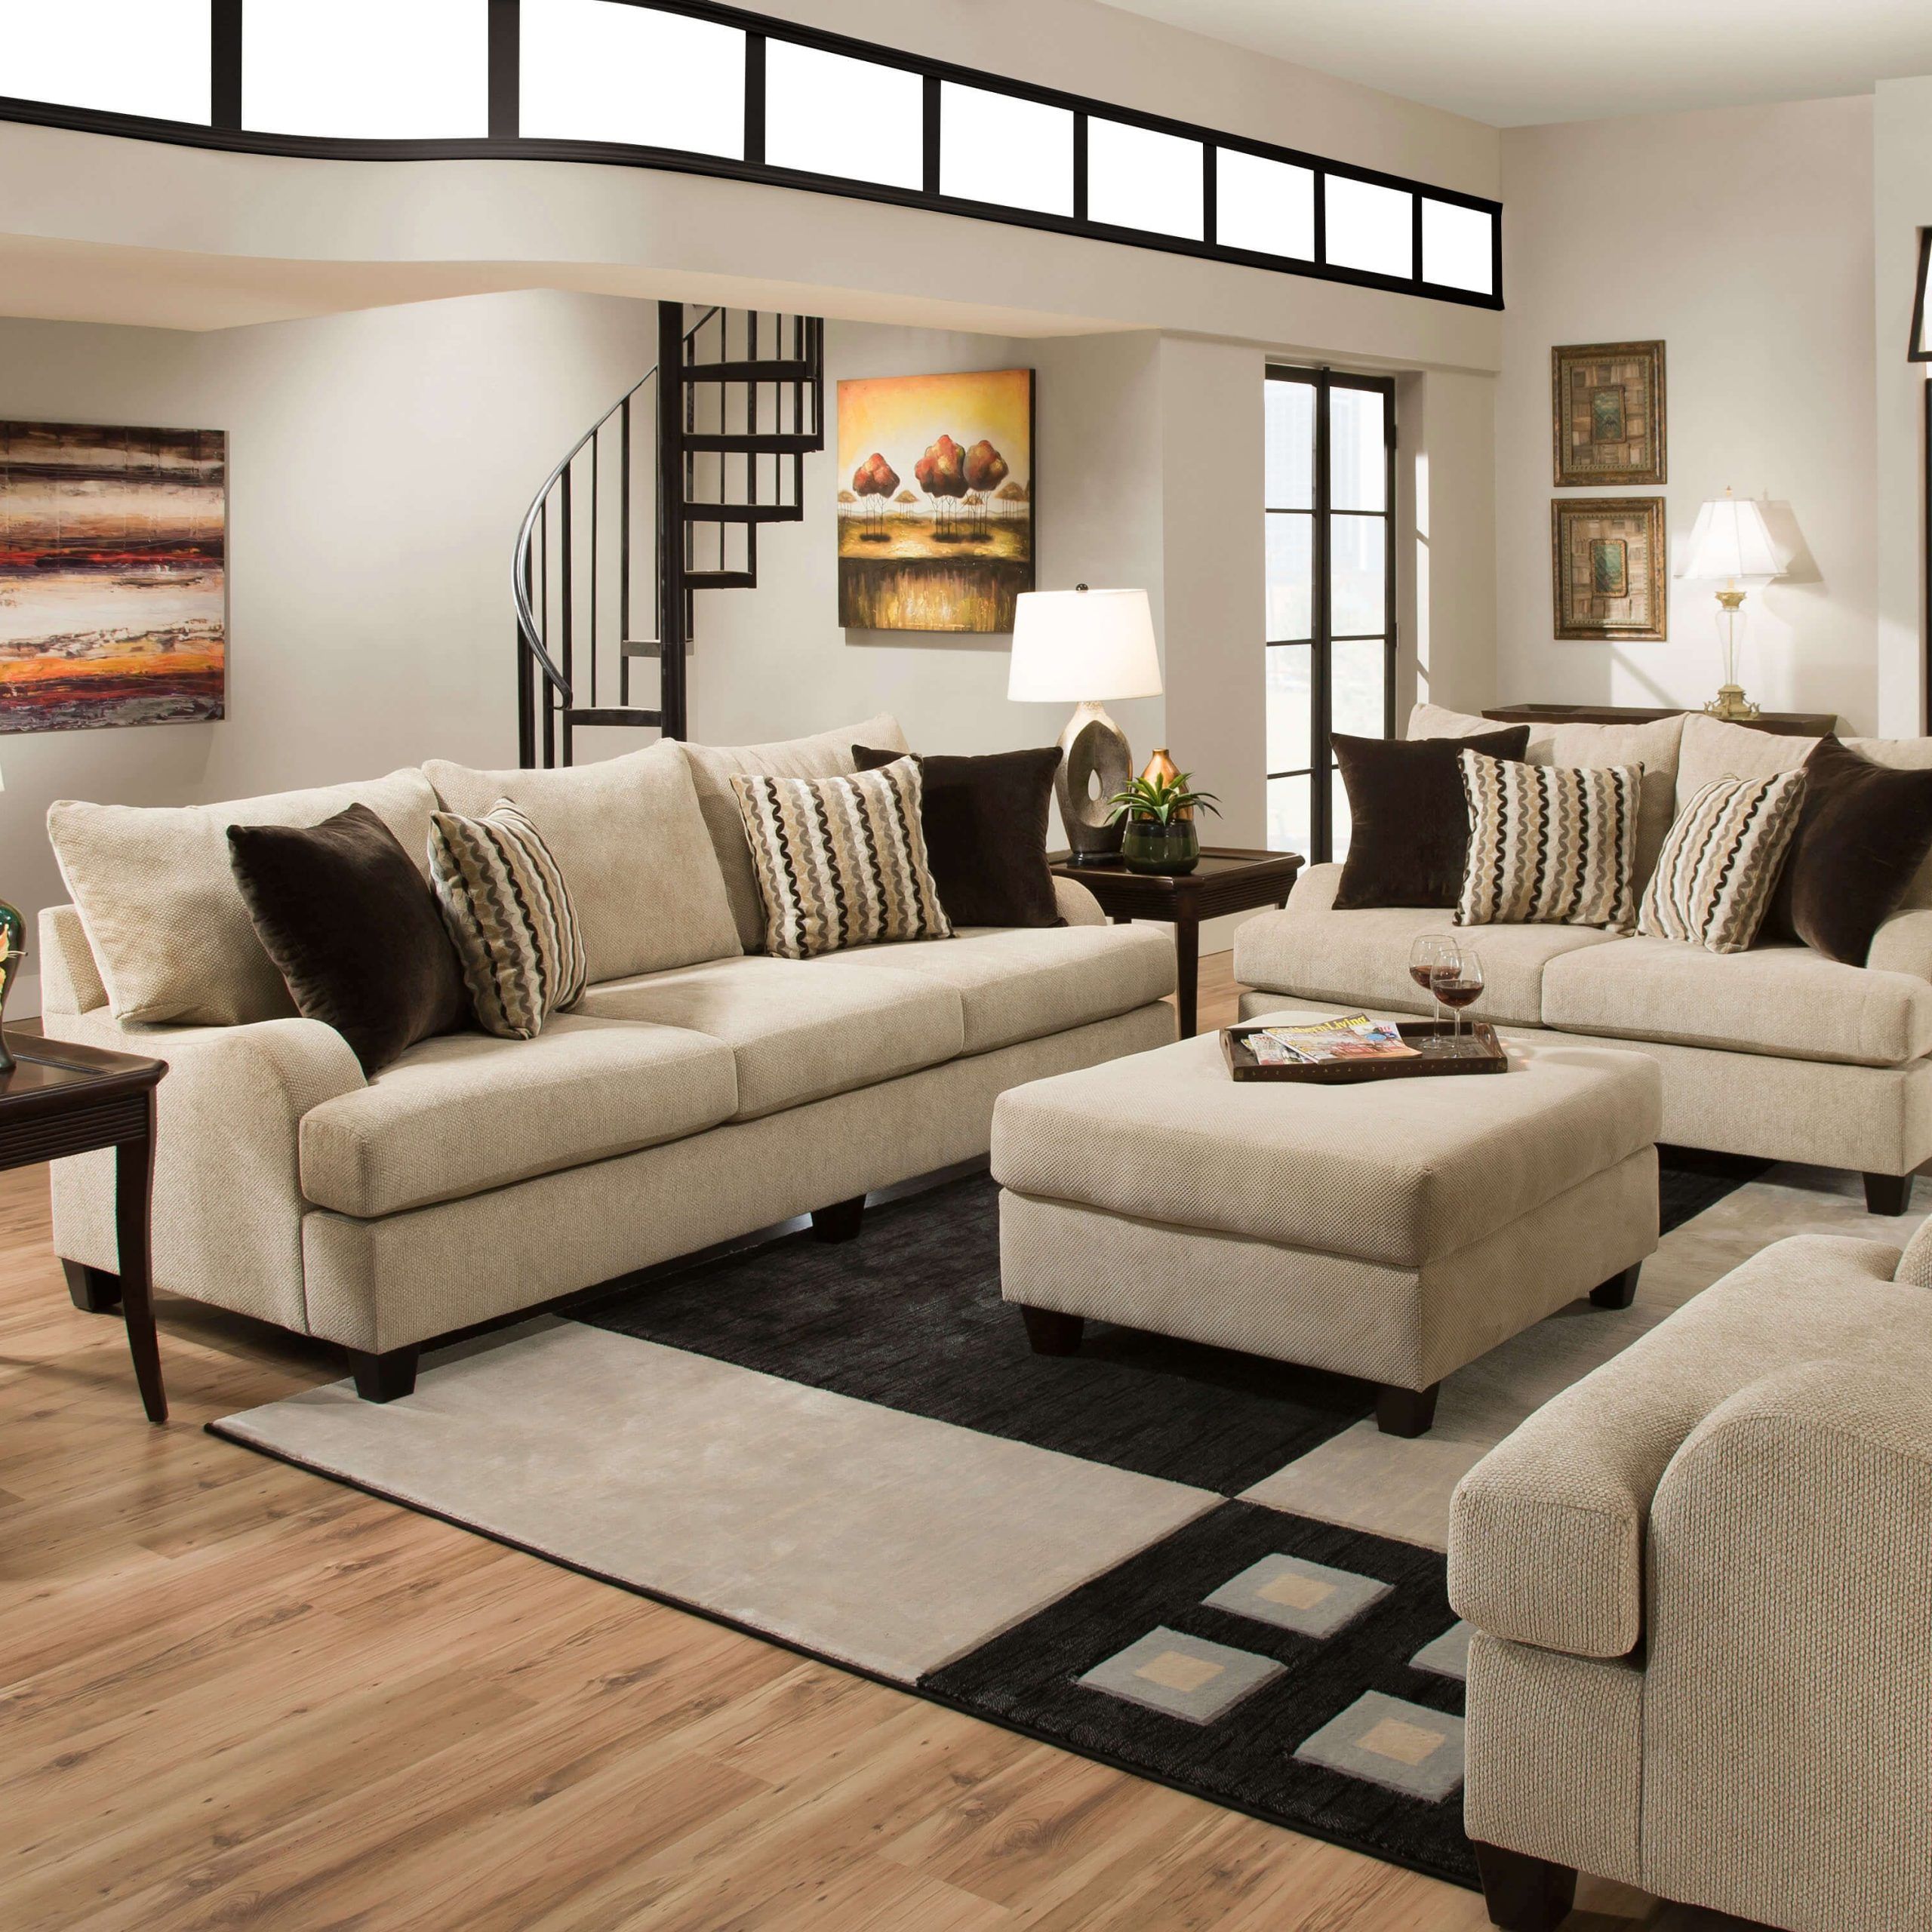 Simmons Trinidad Taupe Living Room Set | Wohnzimmer Gestalten, Sofa Throughout Sofas For Living Rooms (Gallery 15 of 20)